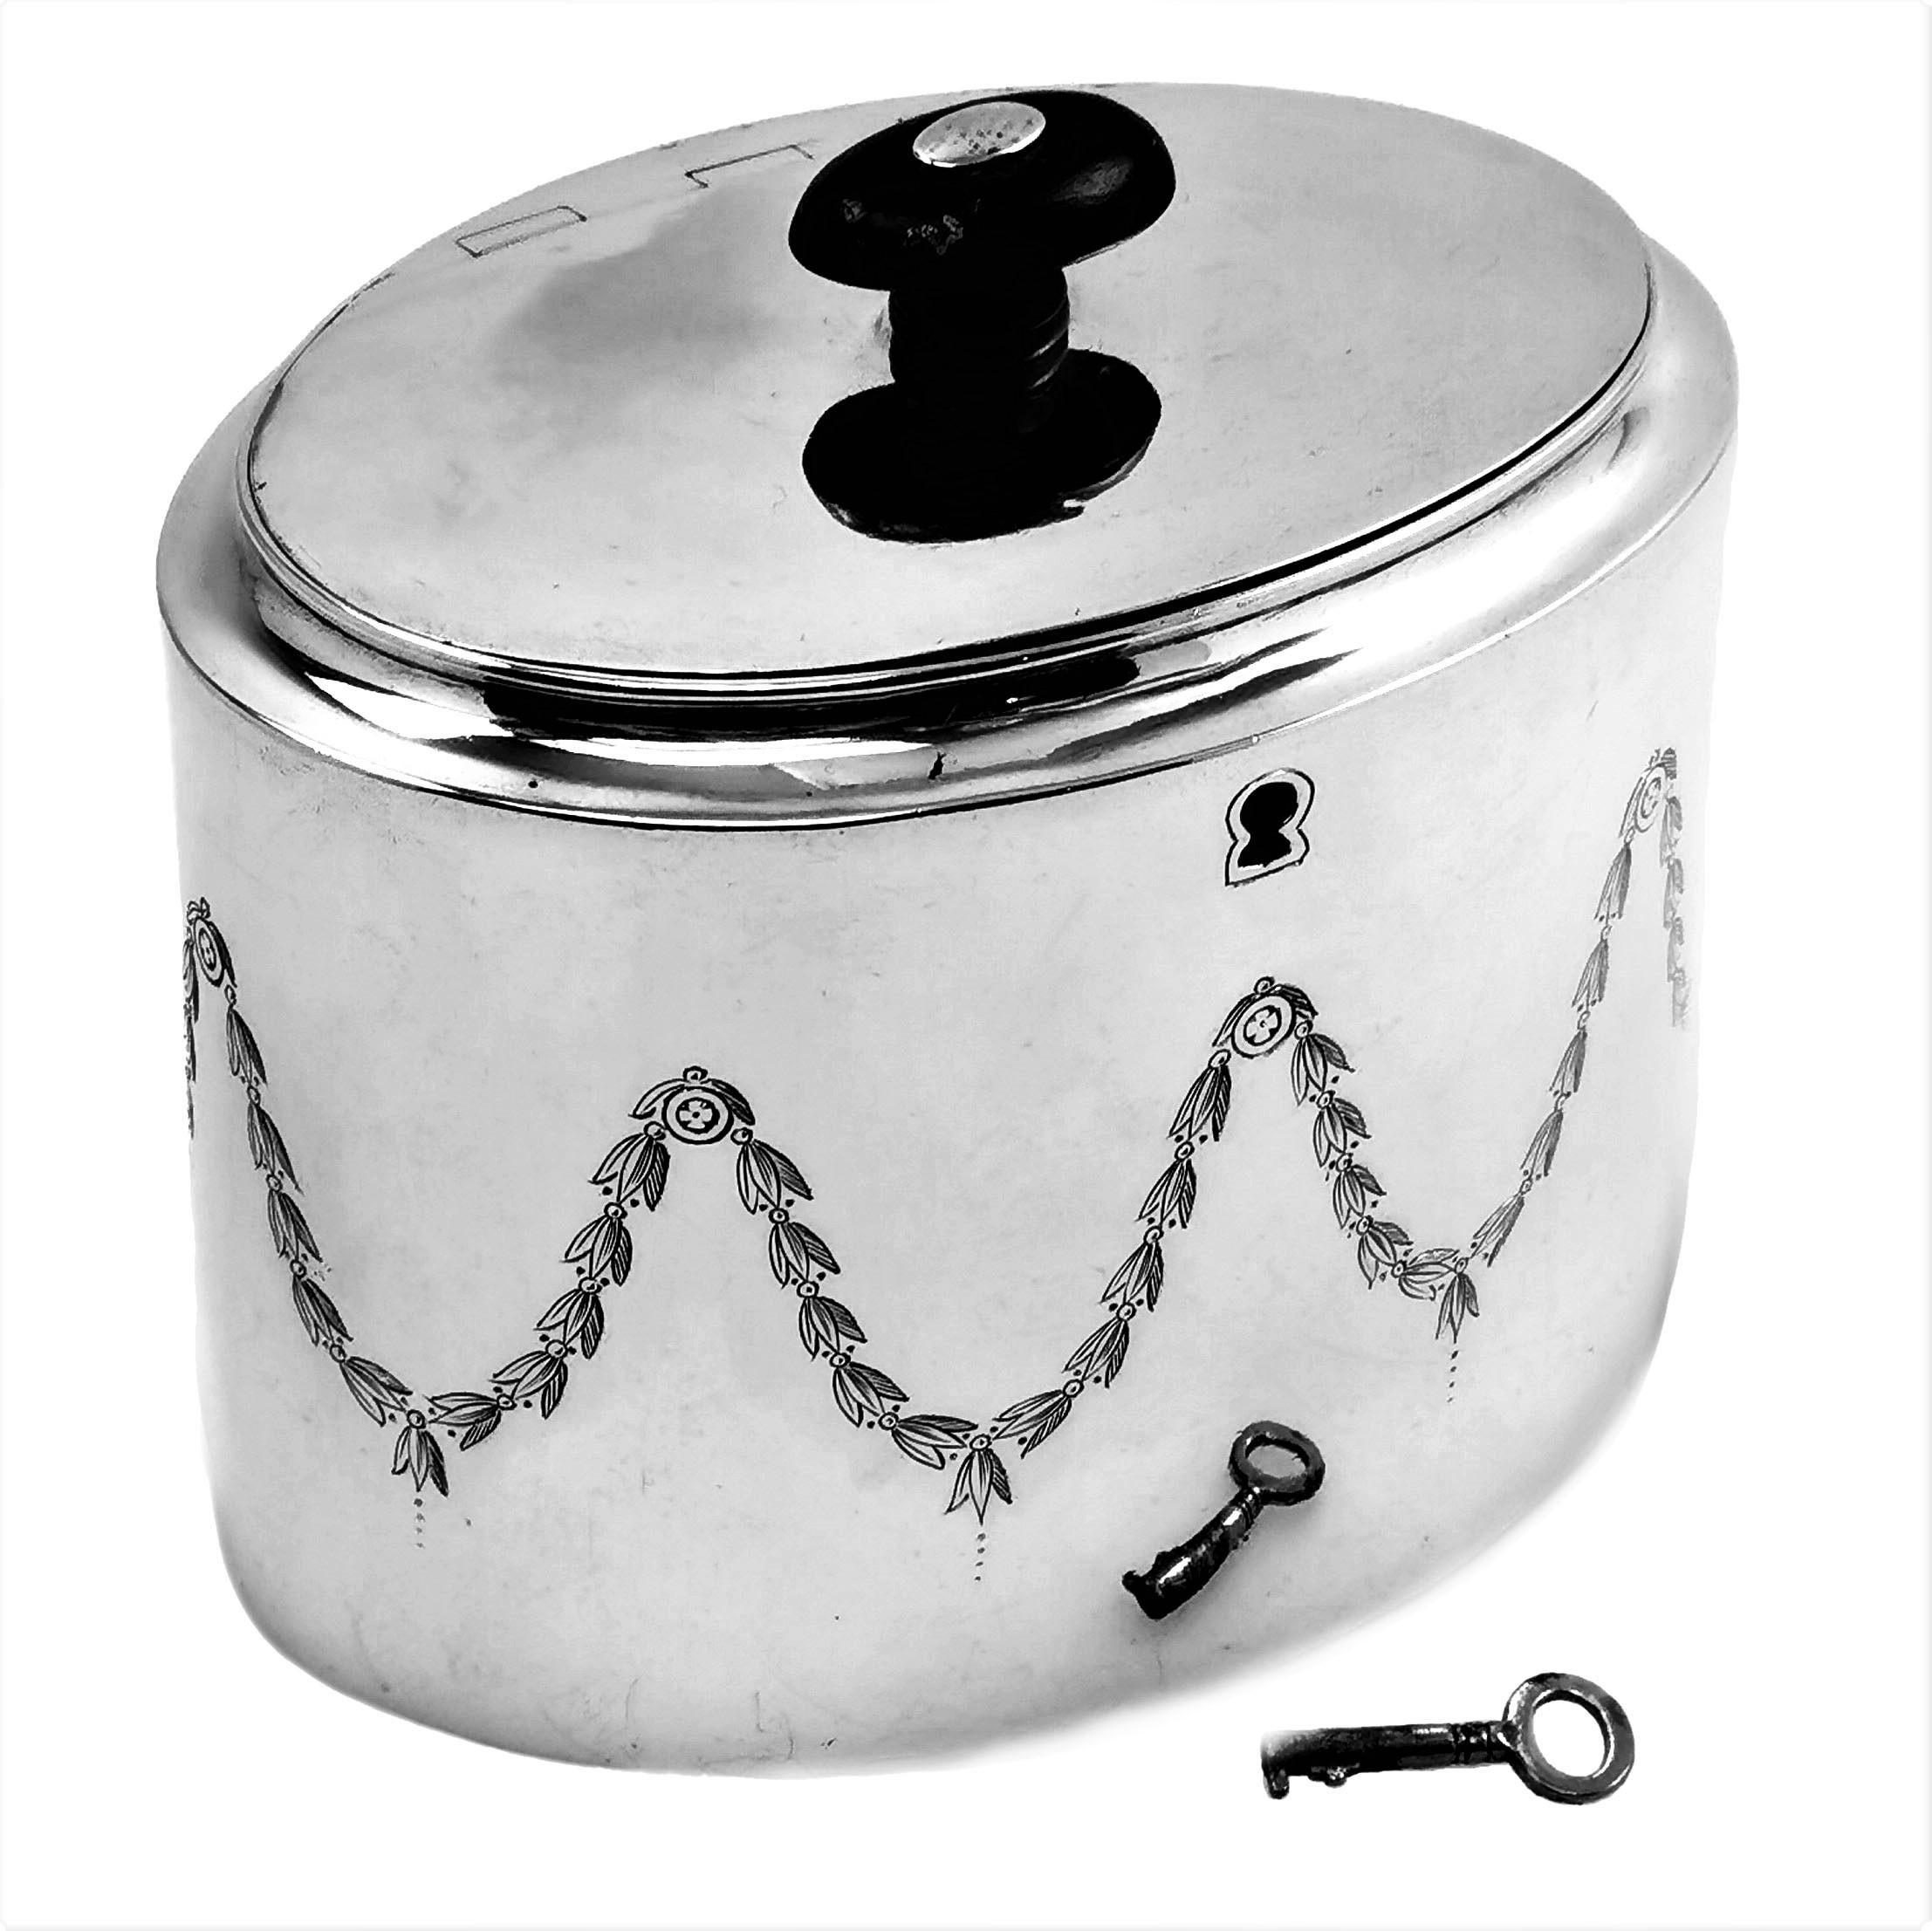 An Antique George III solid Silver Tea Caddy with an elegant engraved band of leaf swags around the body. 

Made in London, England by Abstinando King.

Approx. Weight - 394g / 12.67oz
Approx. Length - 13.1cm
Approx. Width - 9.3cm
Approx. Height -